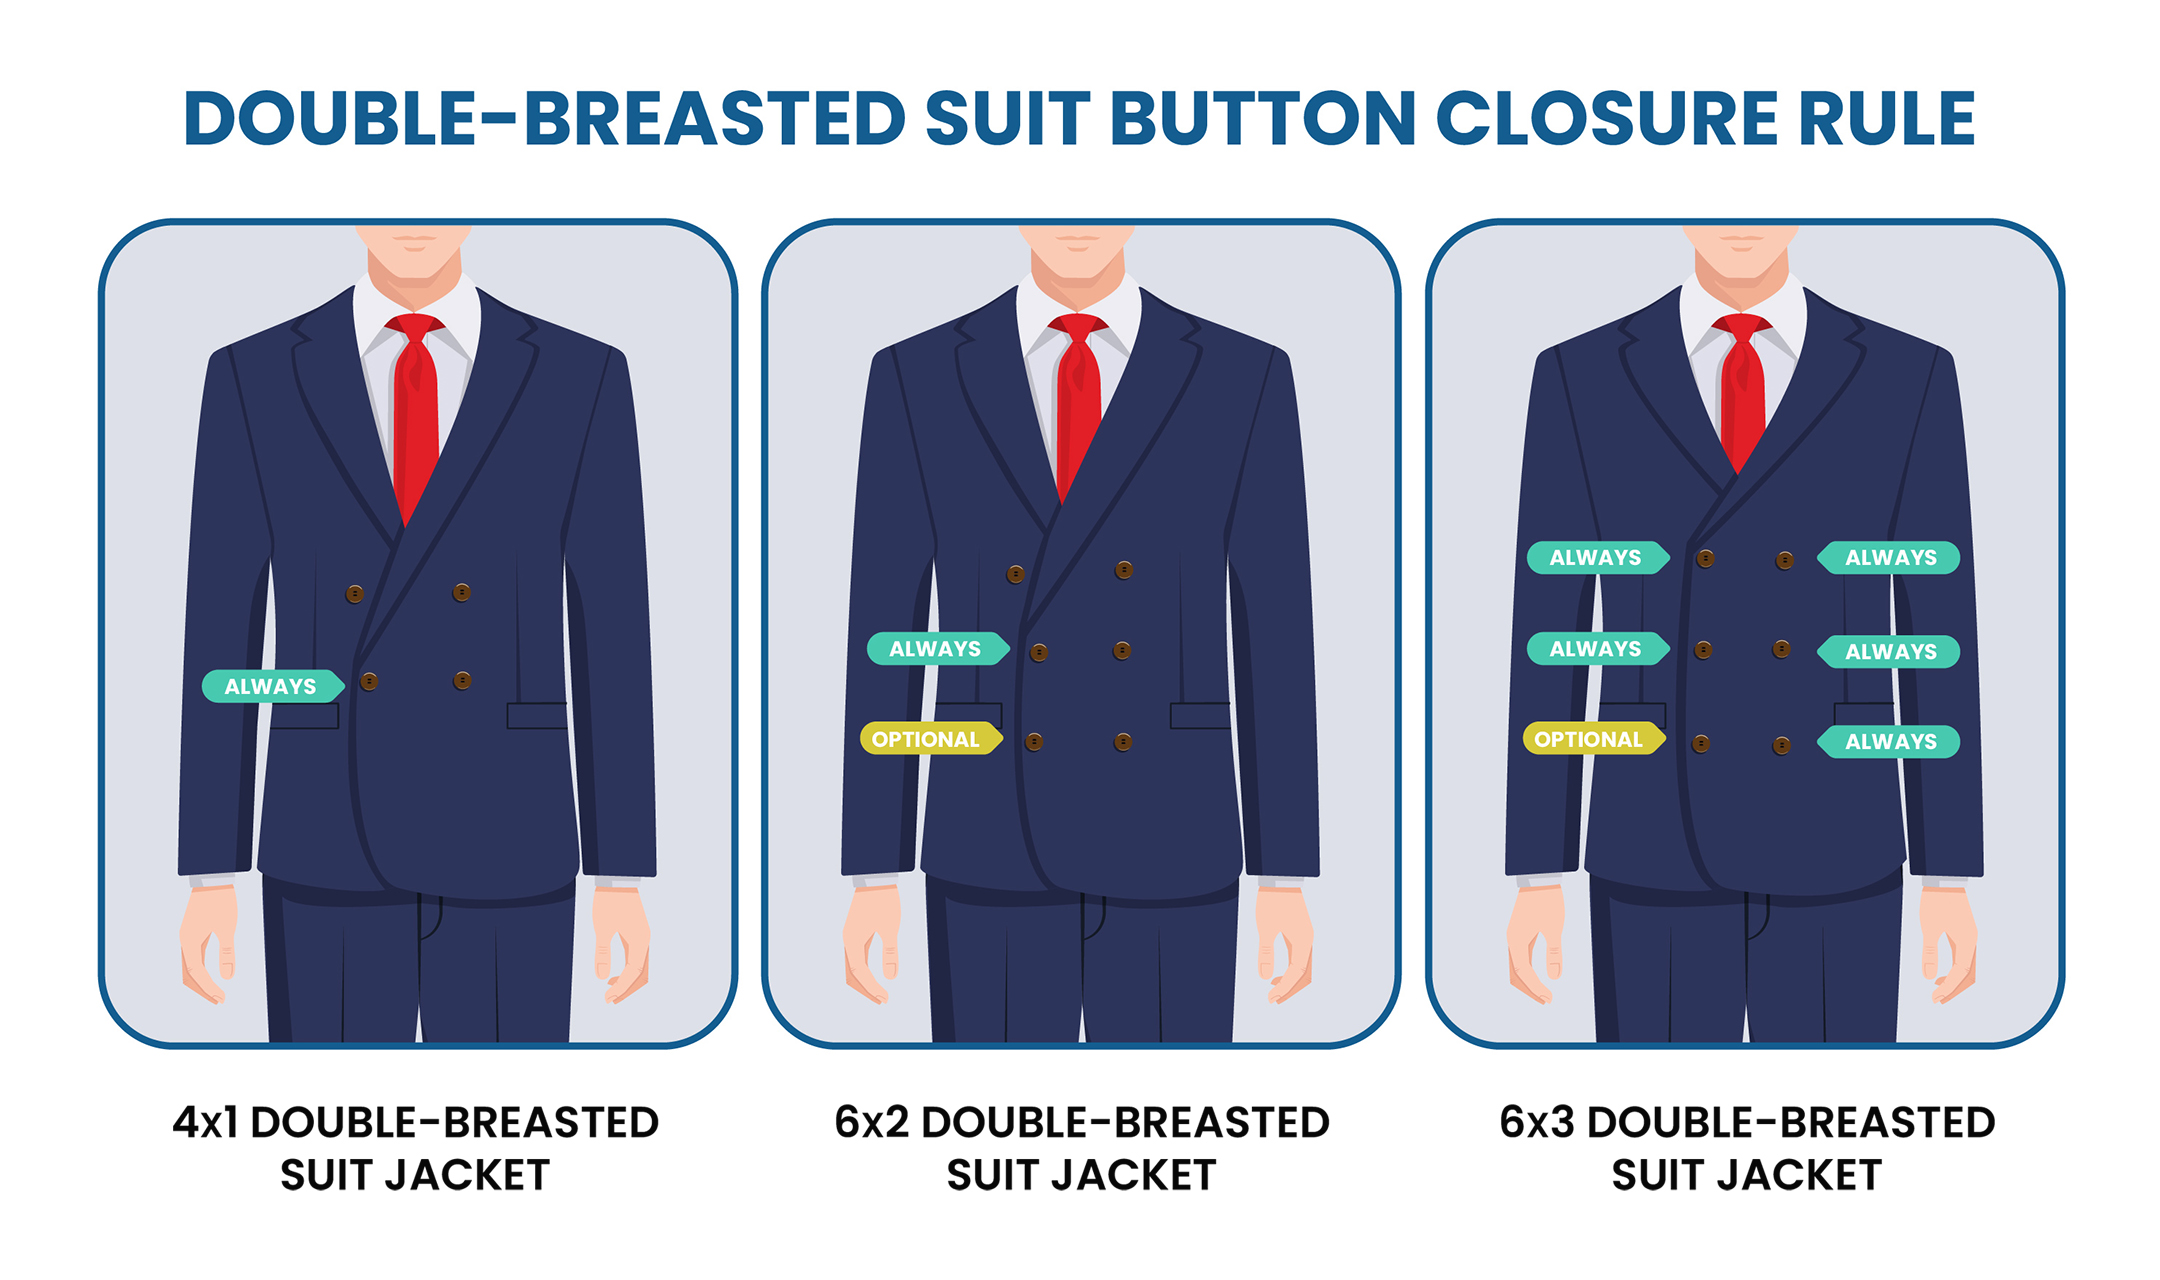 How to Wear a Double-Breasted Suit: 16 Fit and Style Tips